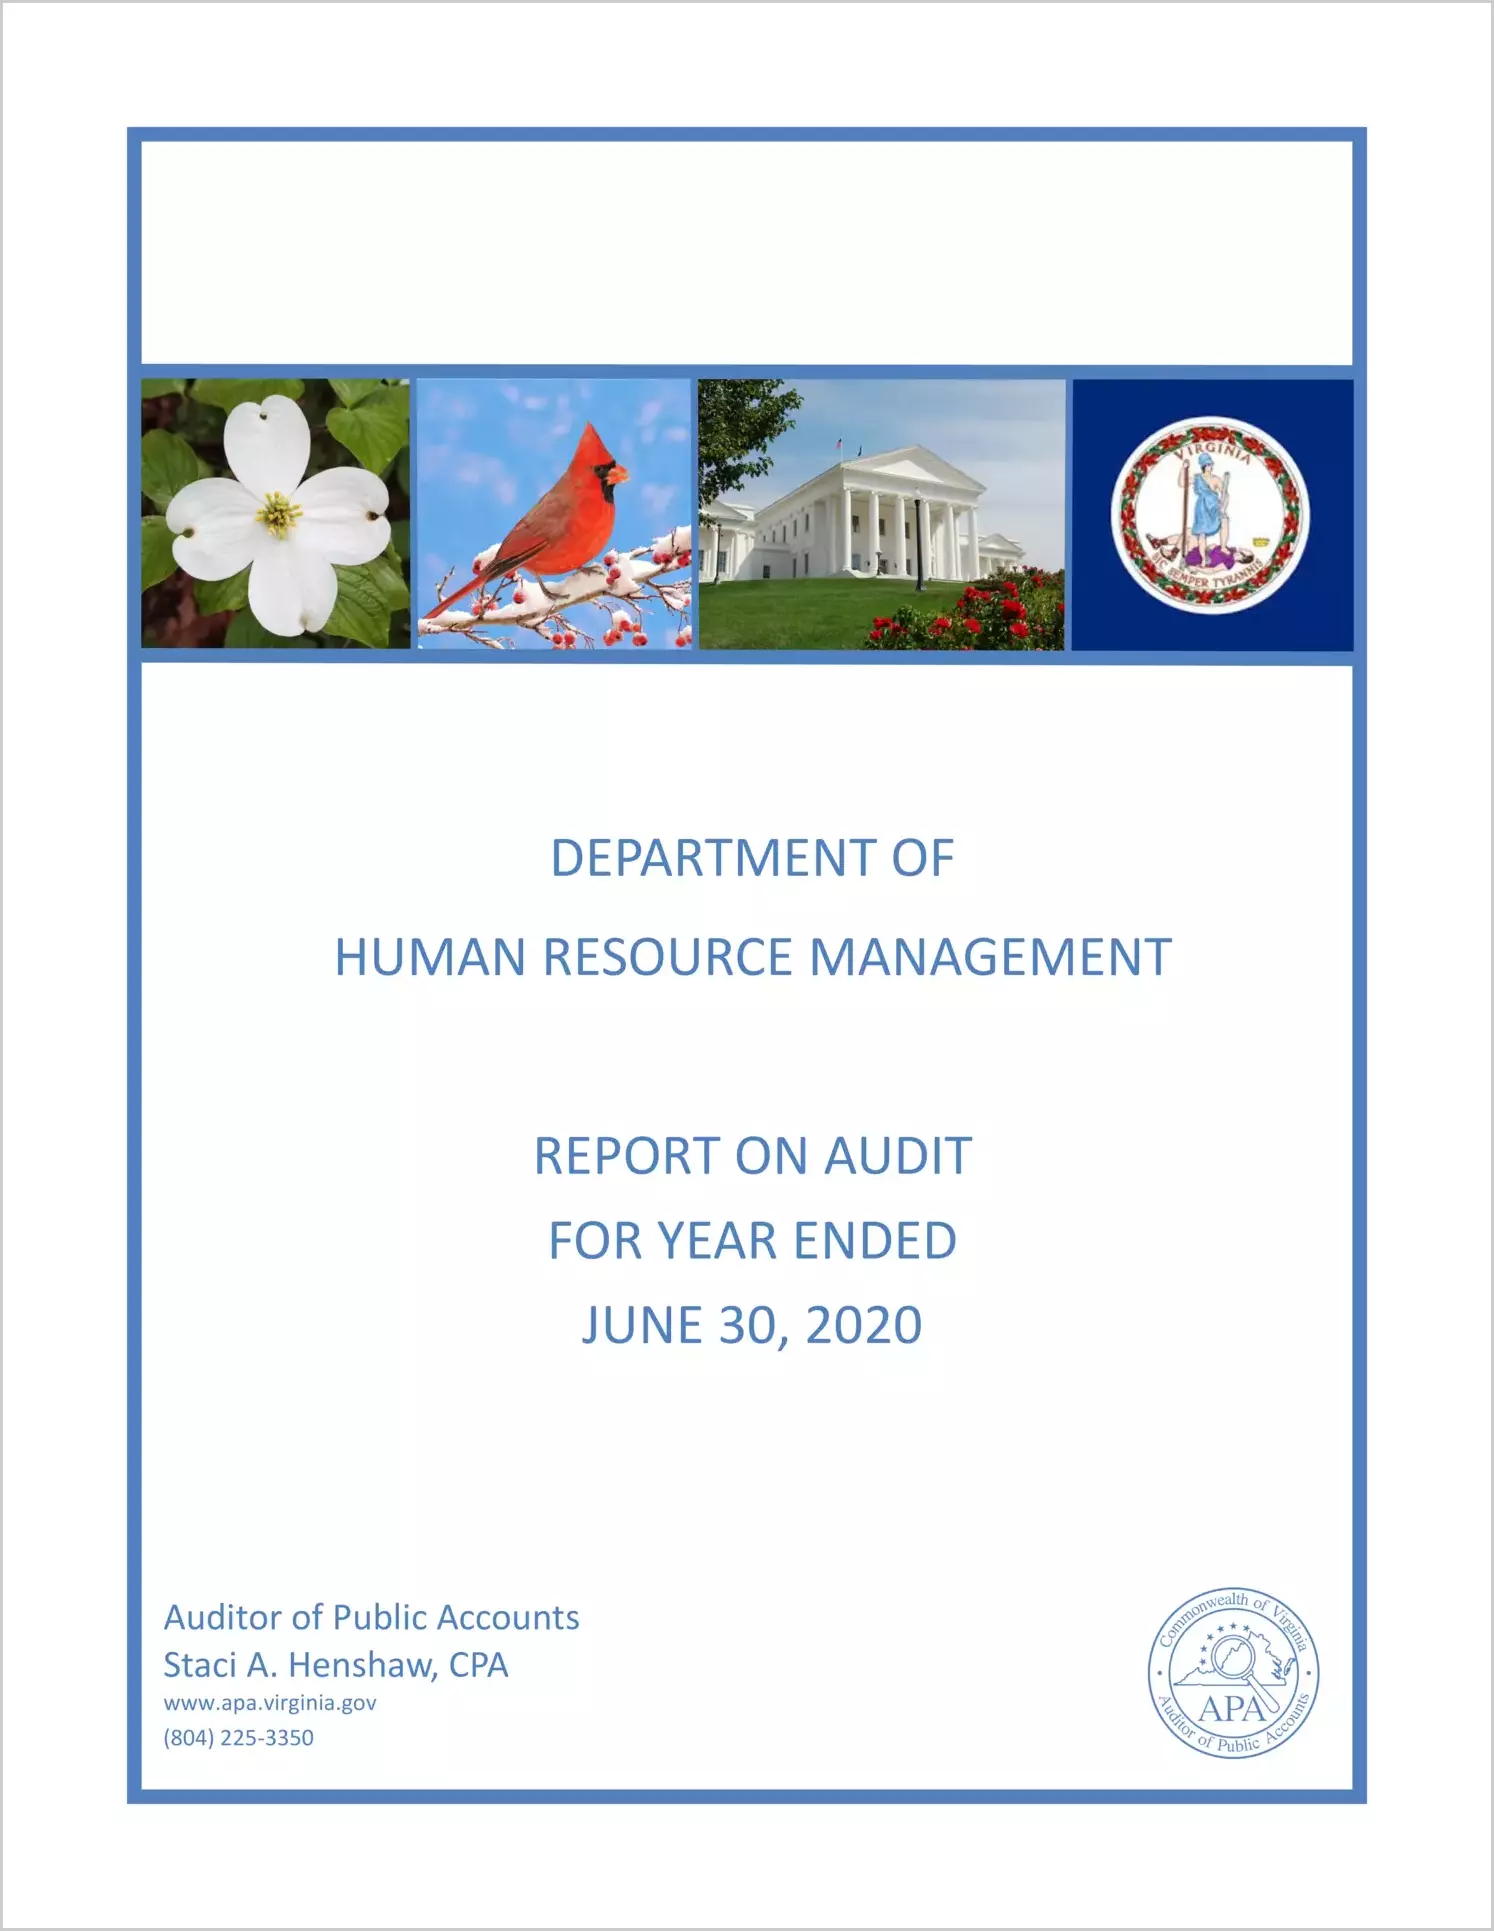 Department of Human Resource Management for the year ended June 30, 2020